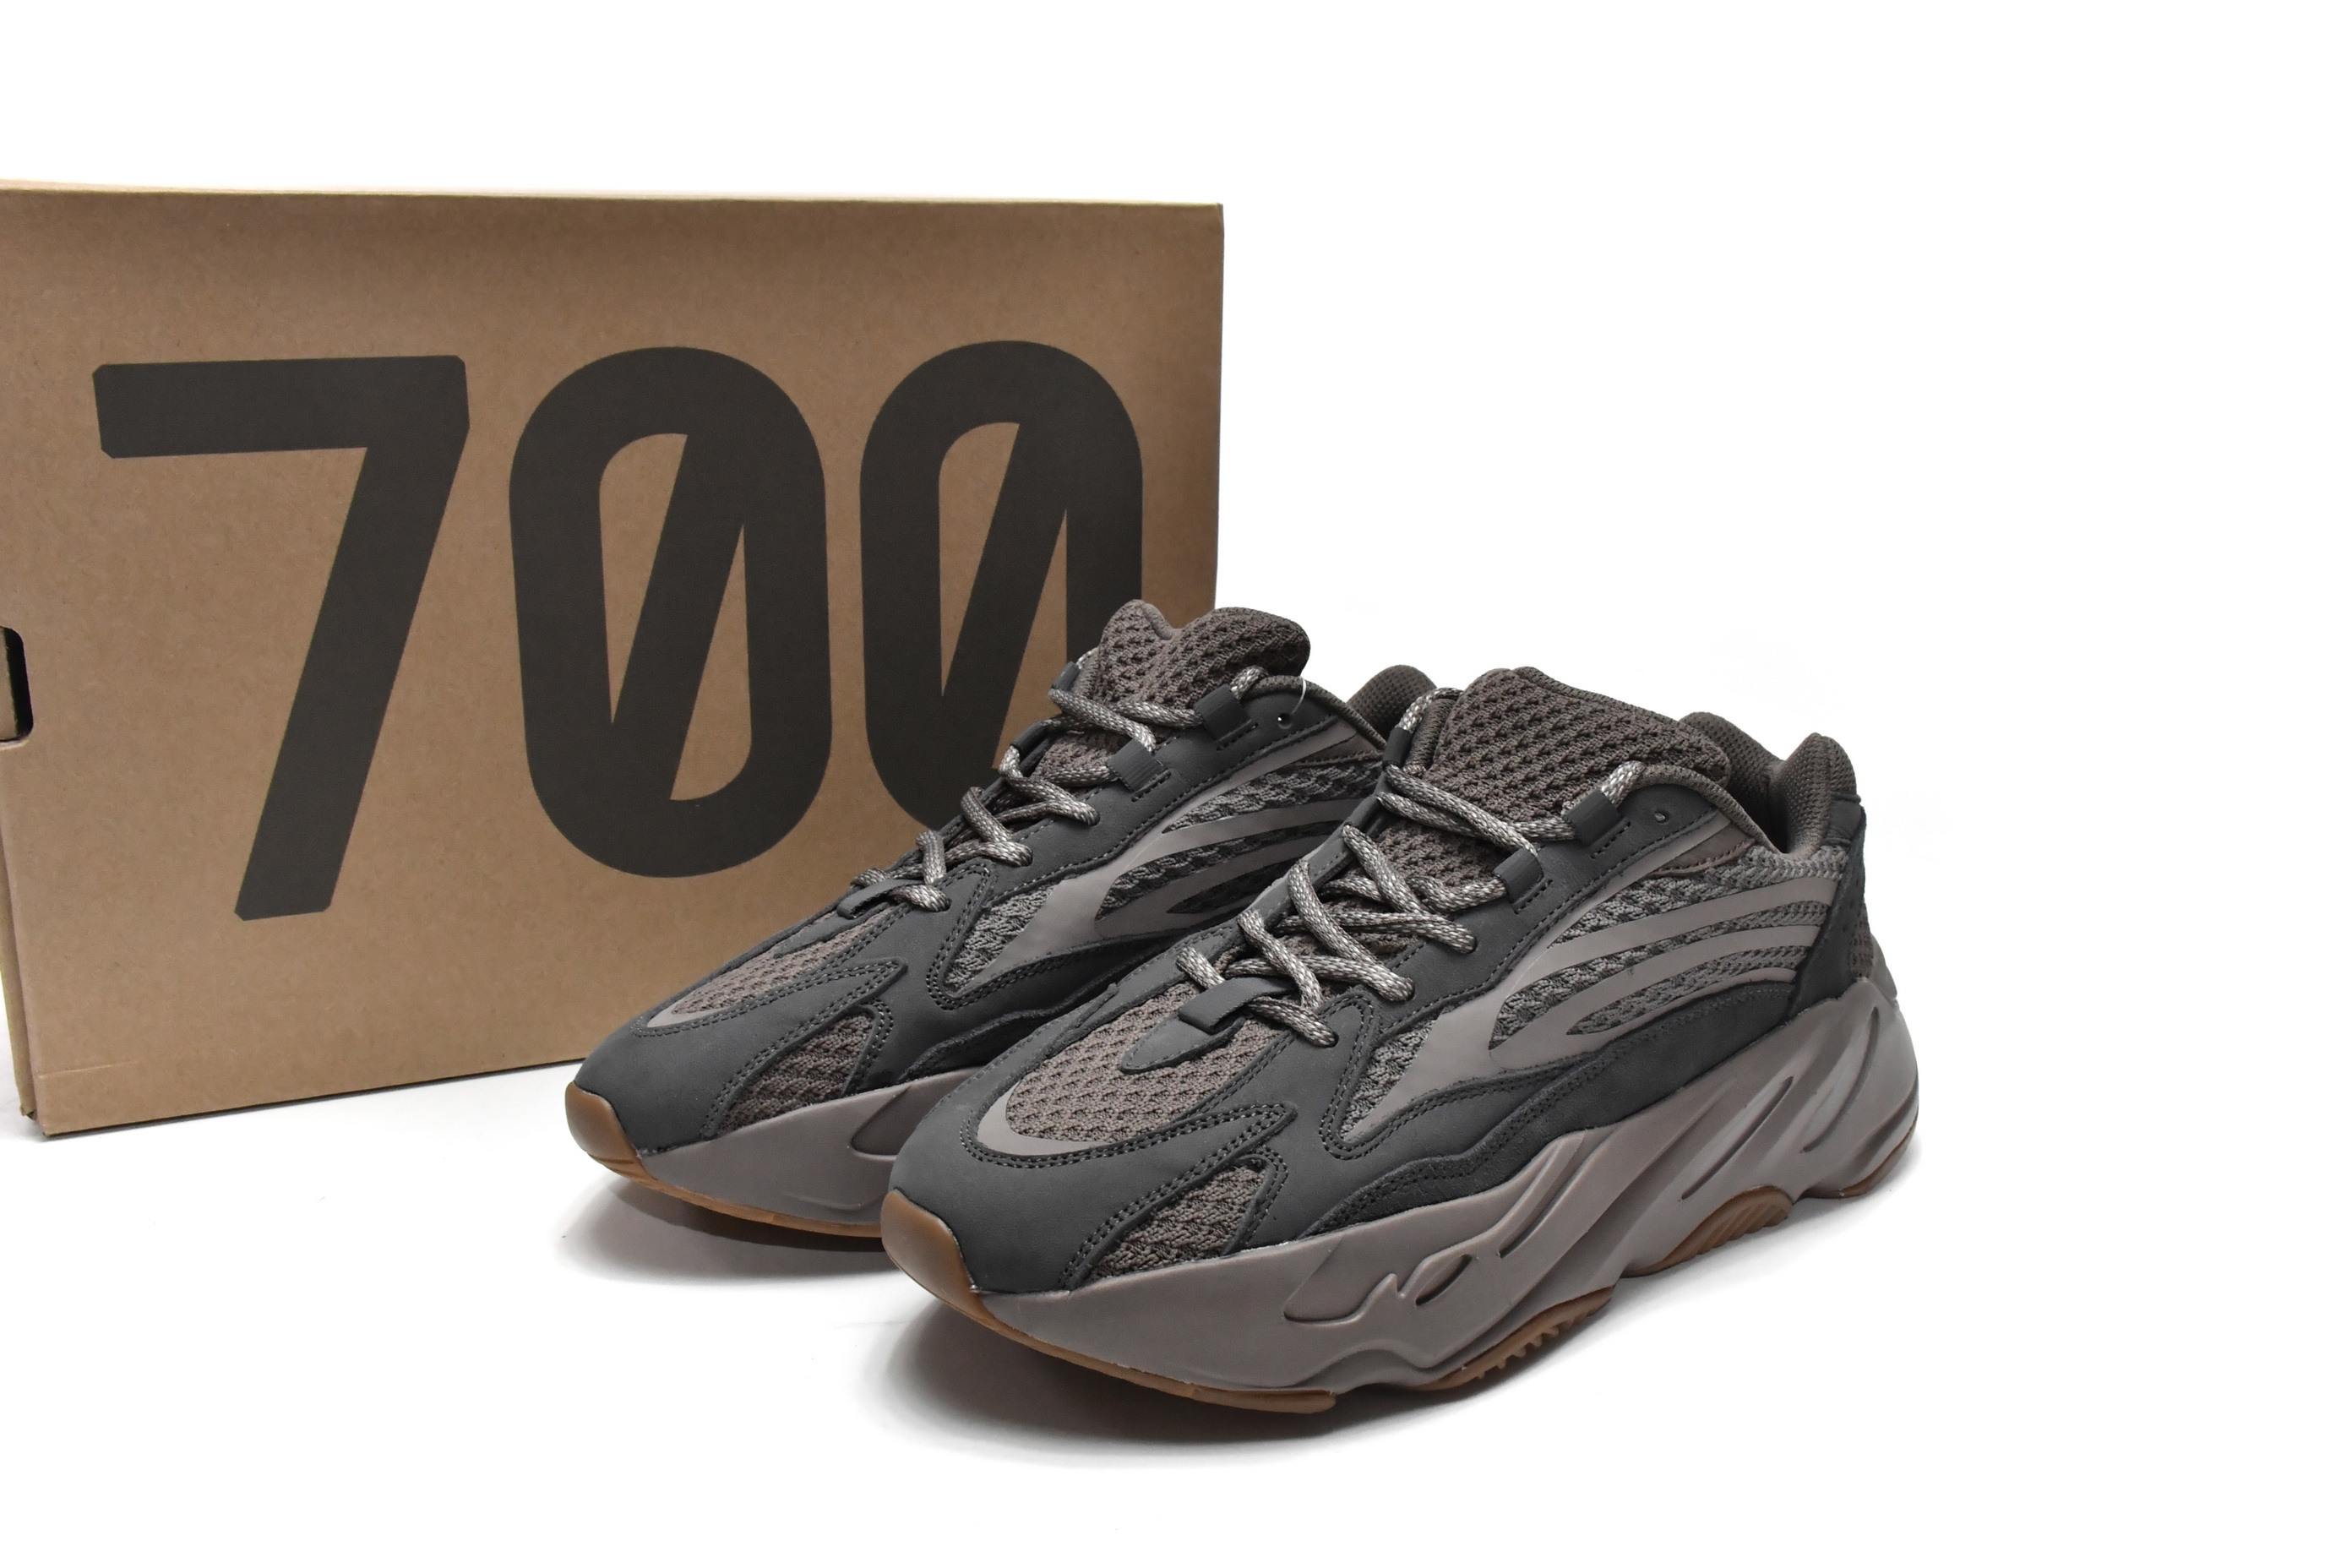 Adidas Yeezy Boost 700 V2 'Mauve' GZ0724 - Trendy and Stylish Sneakers